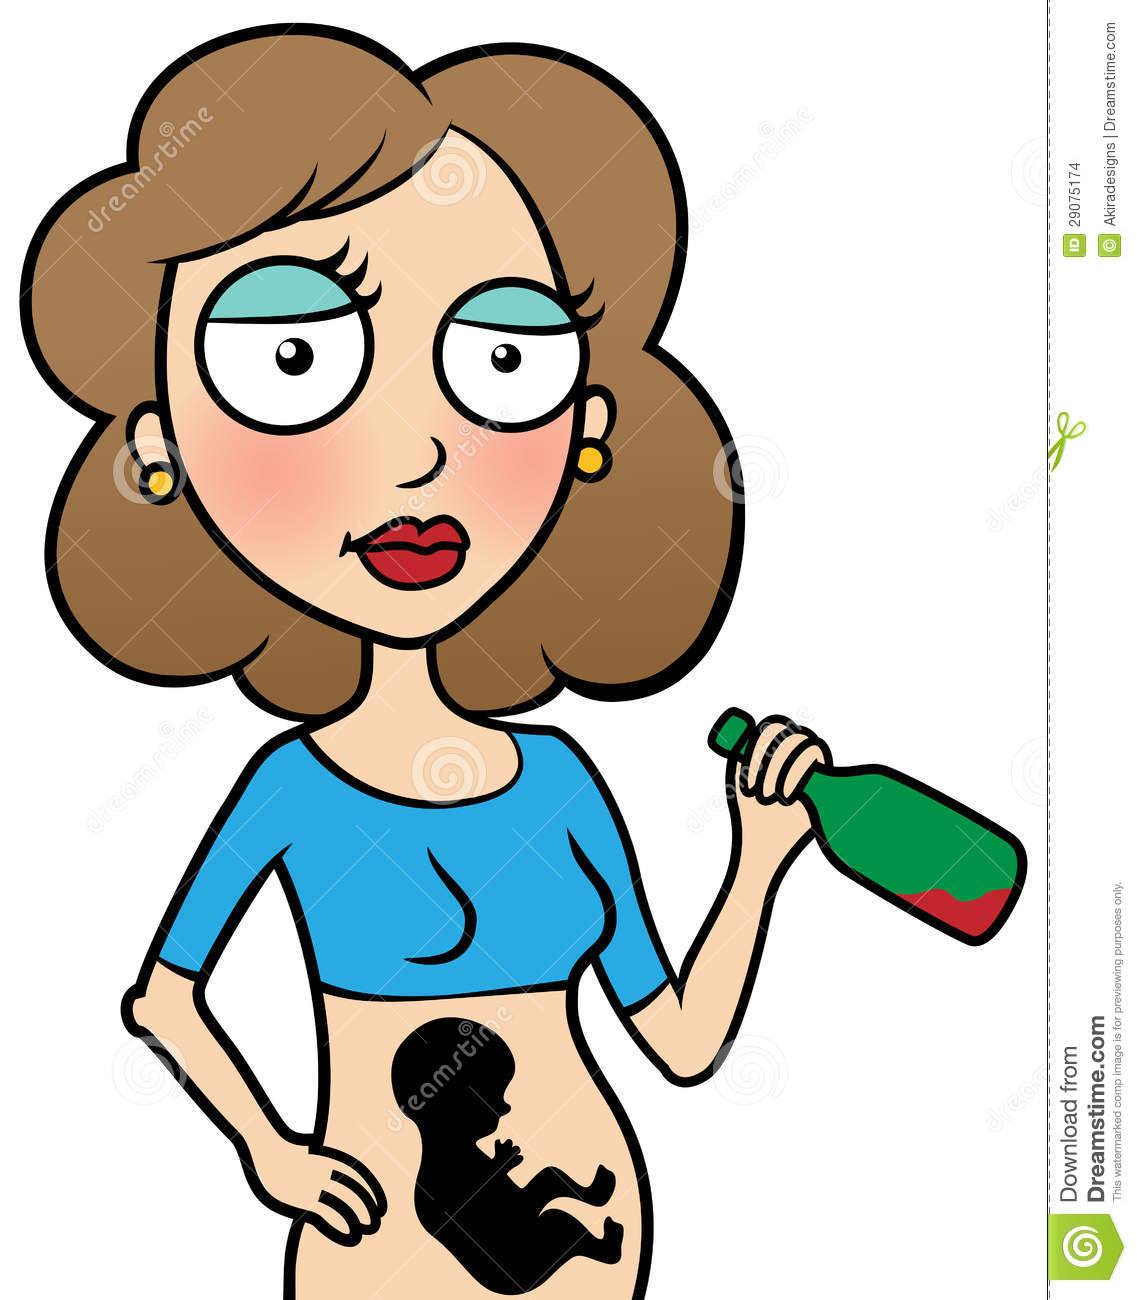 Cartoon Vector Illustration Of Young Pregnant Woman Drinking Alcohol